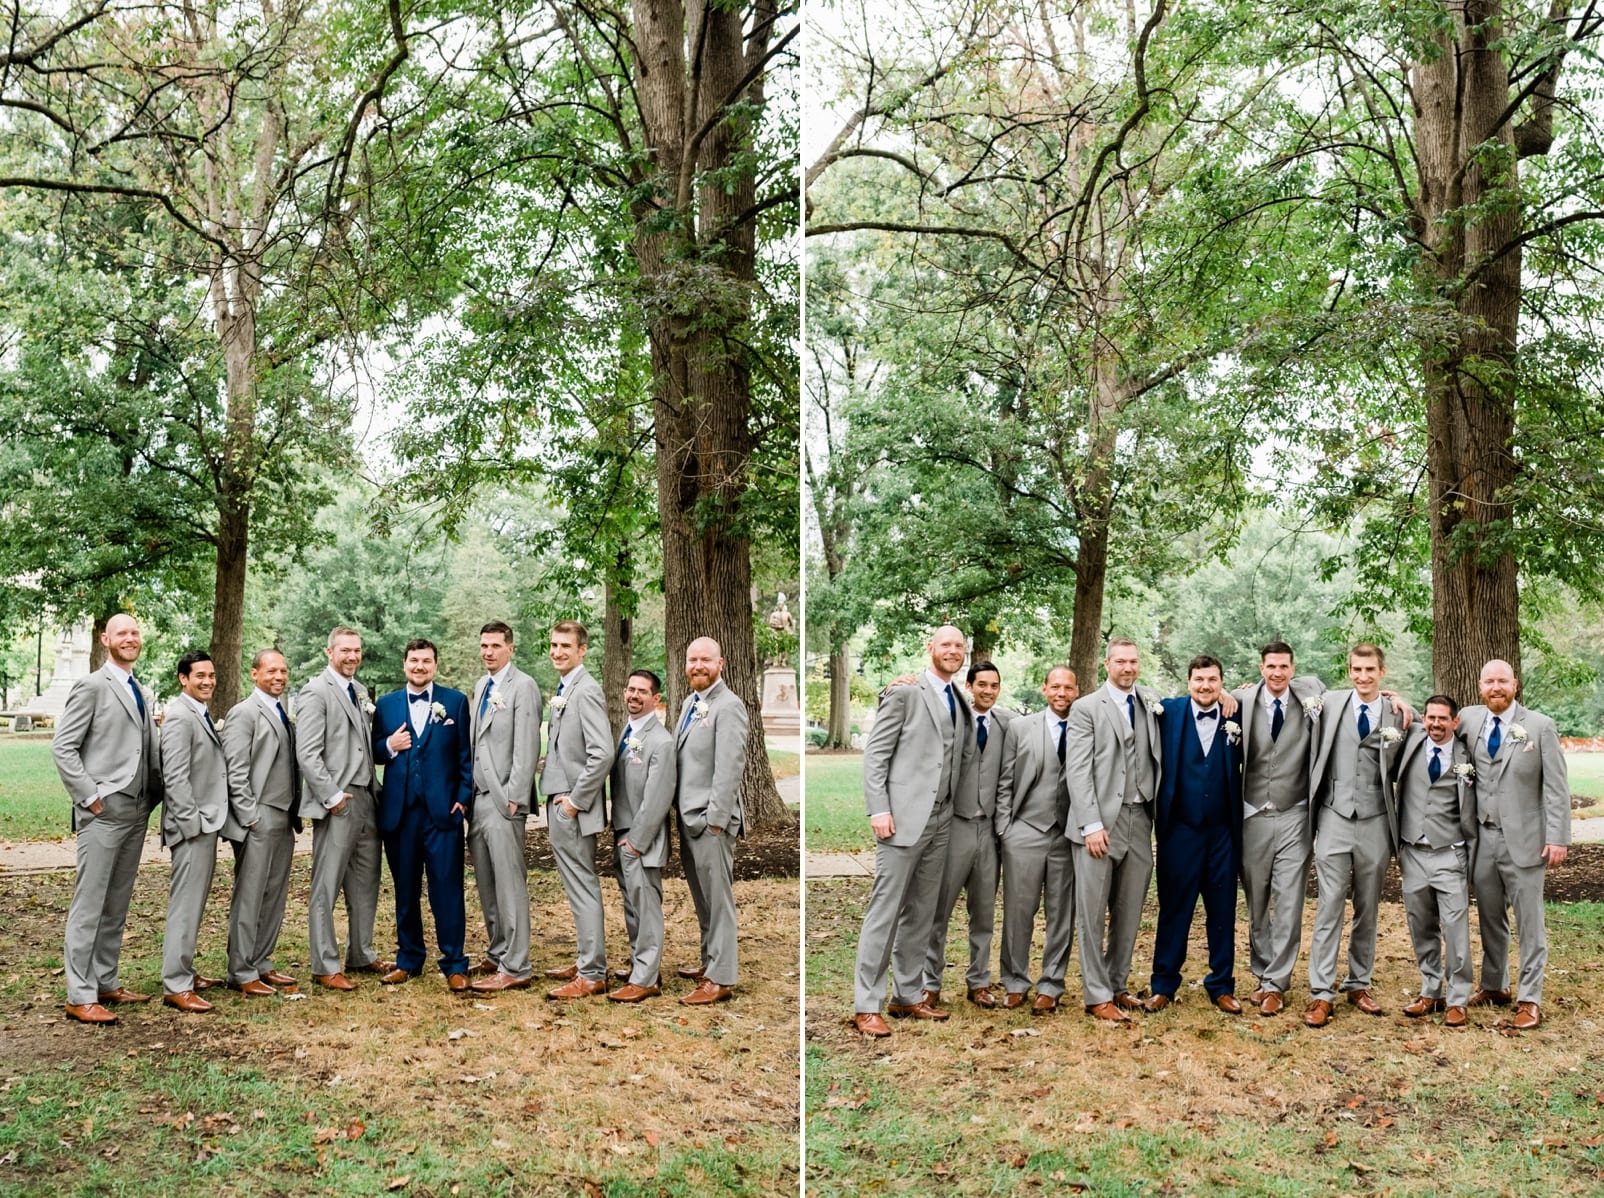 Raleigh Capital Grounds groom in navy blue tux and groomsmen in gray suits photo